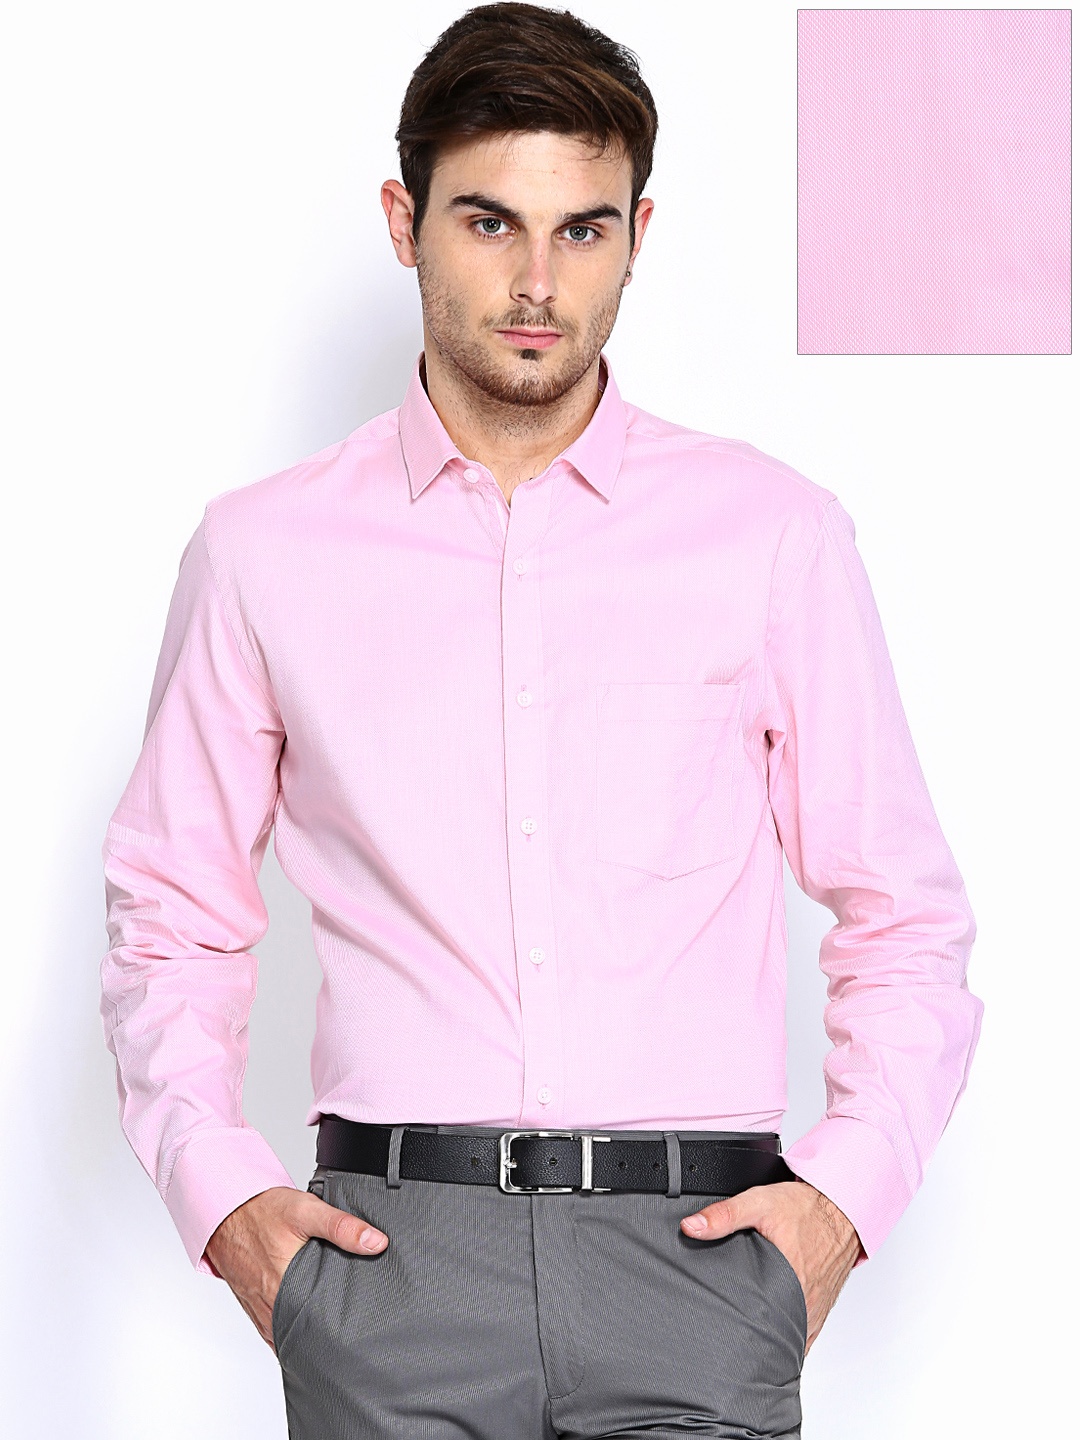 15 Latest Designs of Pink Shirts For Men and Women 